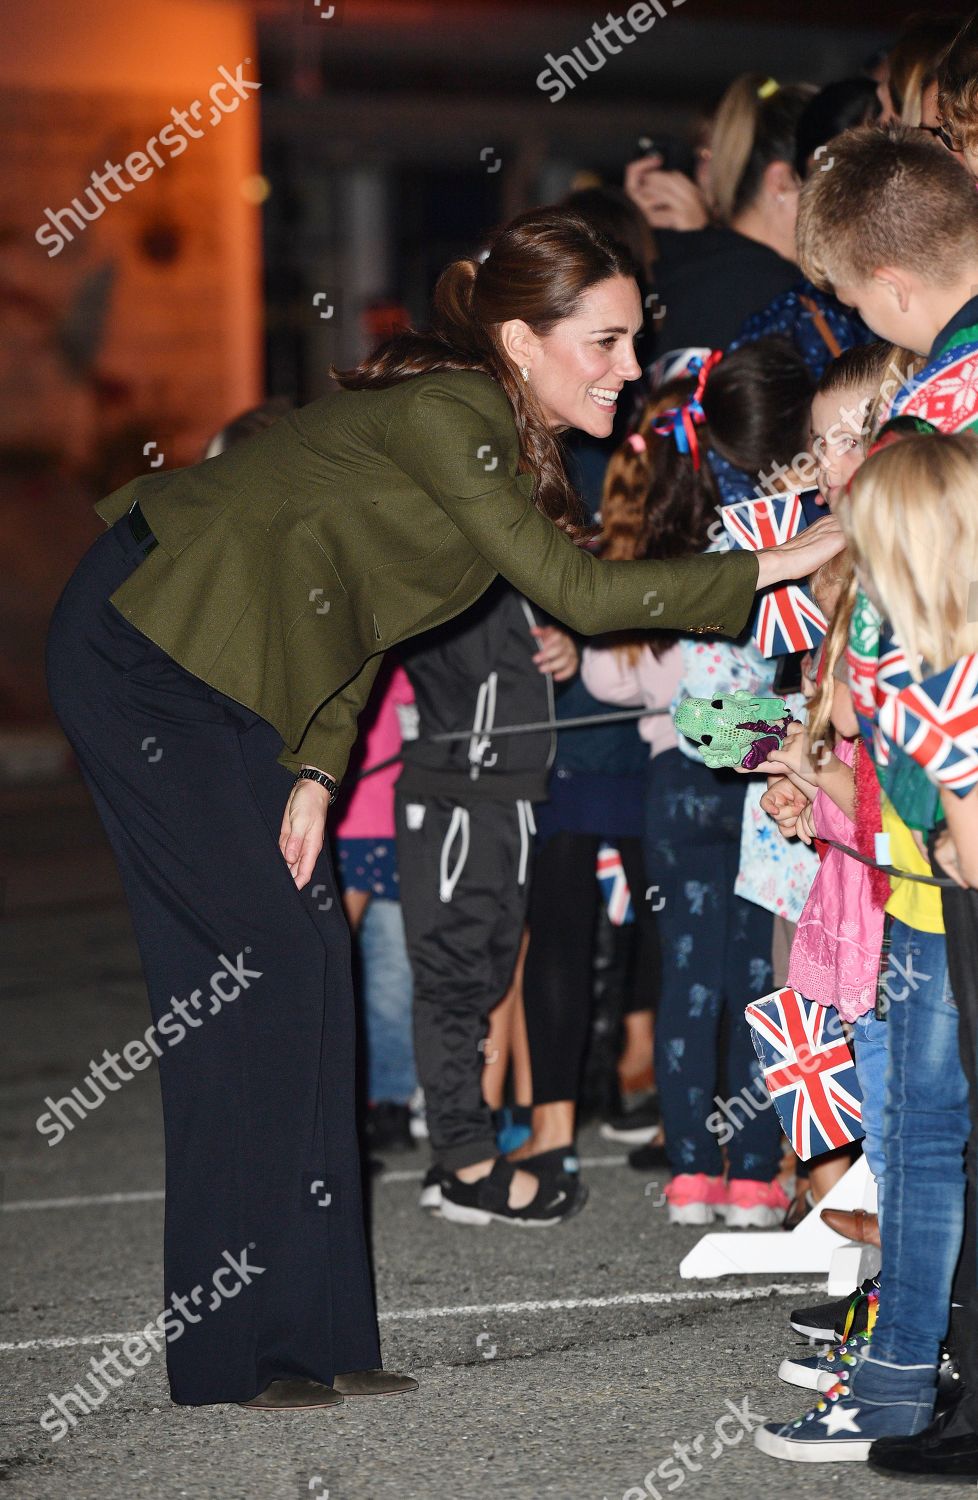 prince-william-and-catherine-duchess-of-cambridge-visit-military-personnel-cyprus-shutterstock-editorial-10014268by.jpg